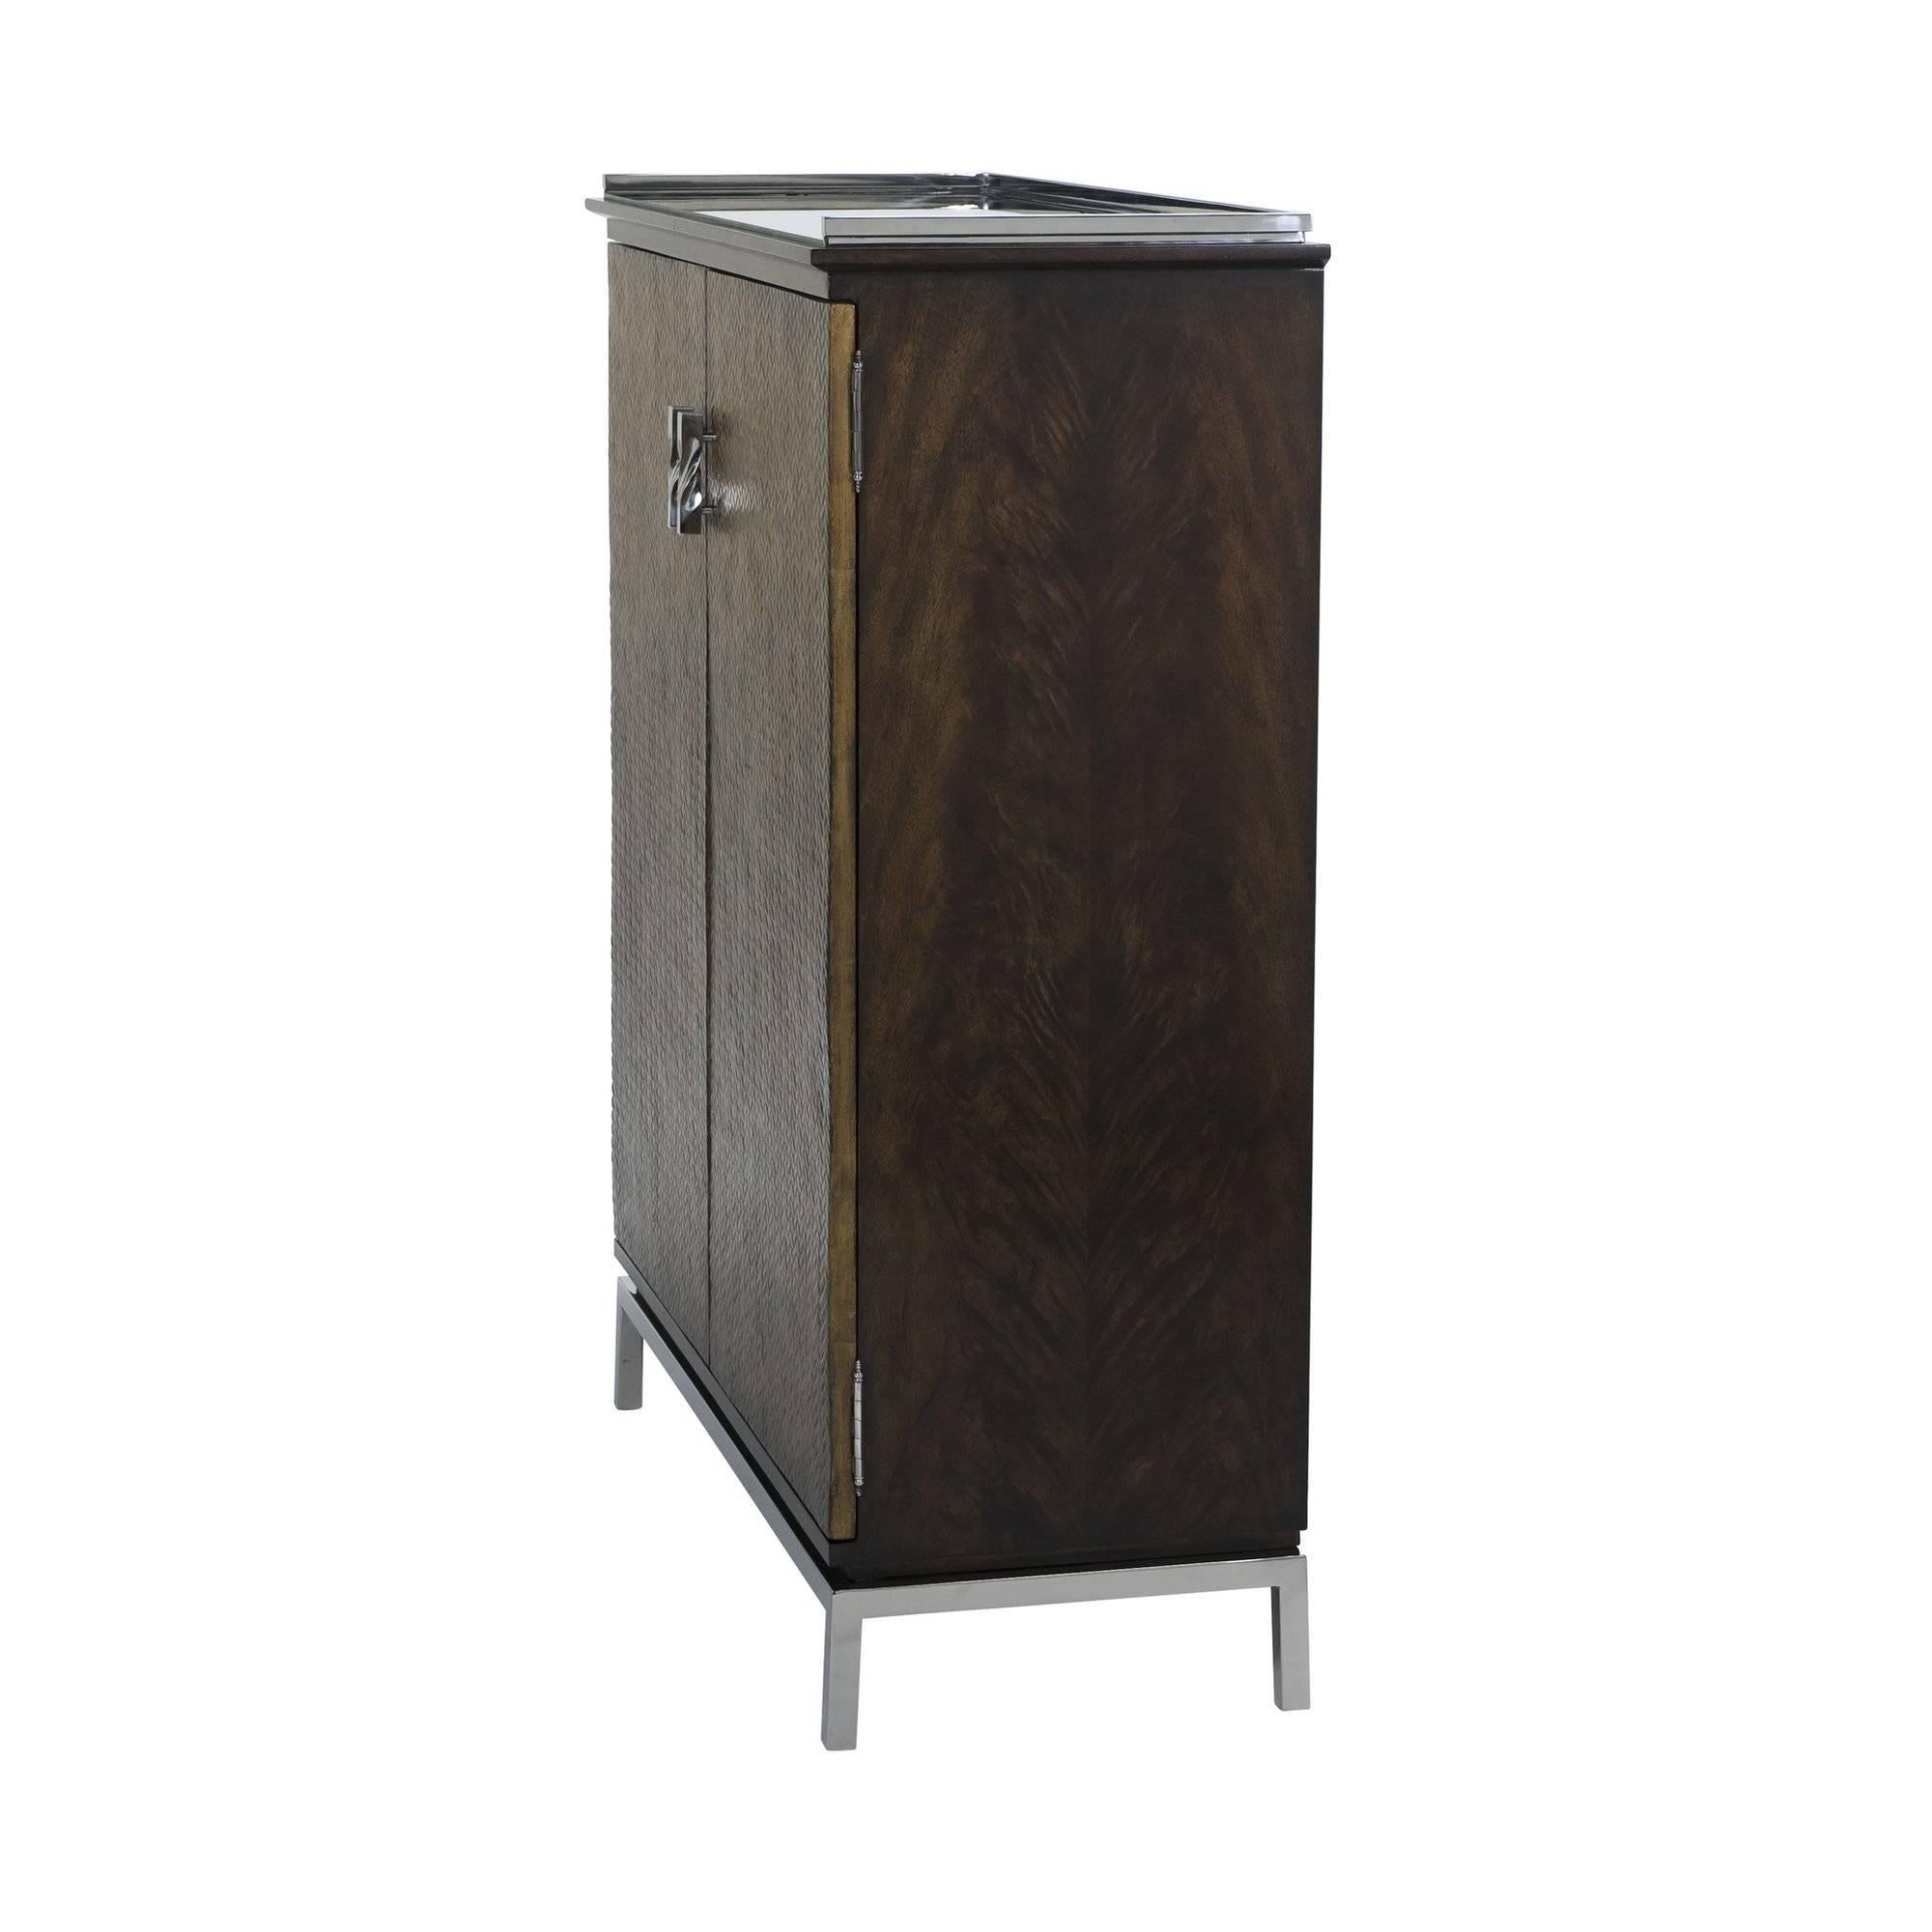 French Mahogany and Stainless Steel Mounted Cabinet